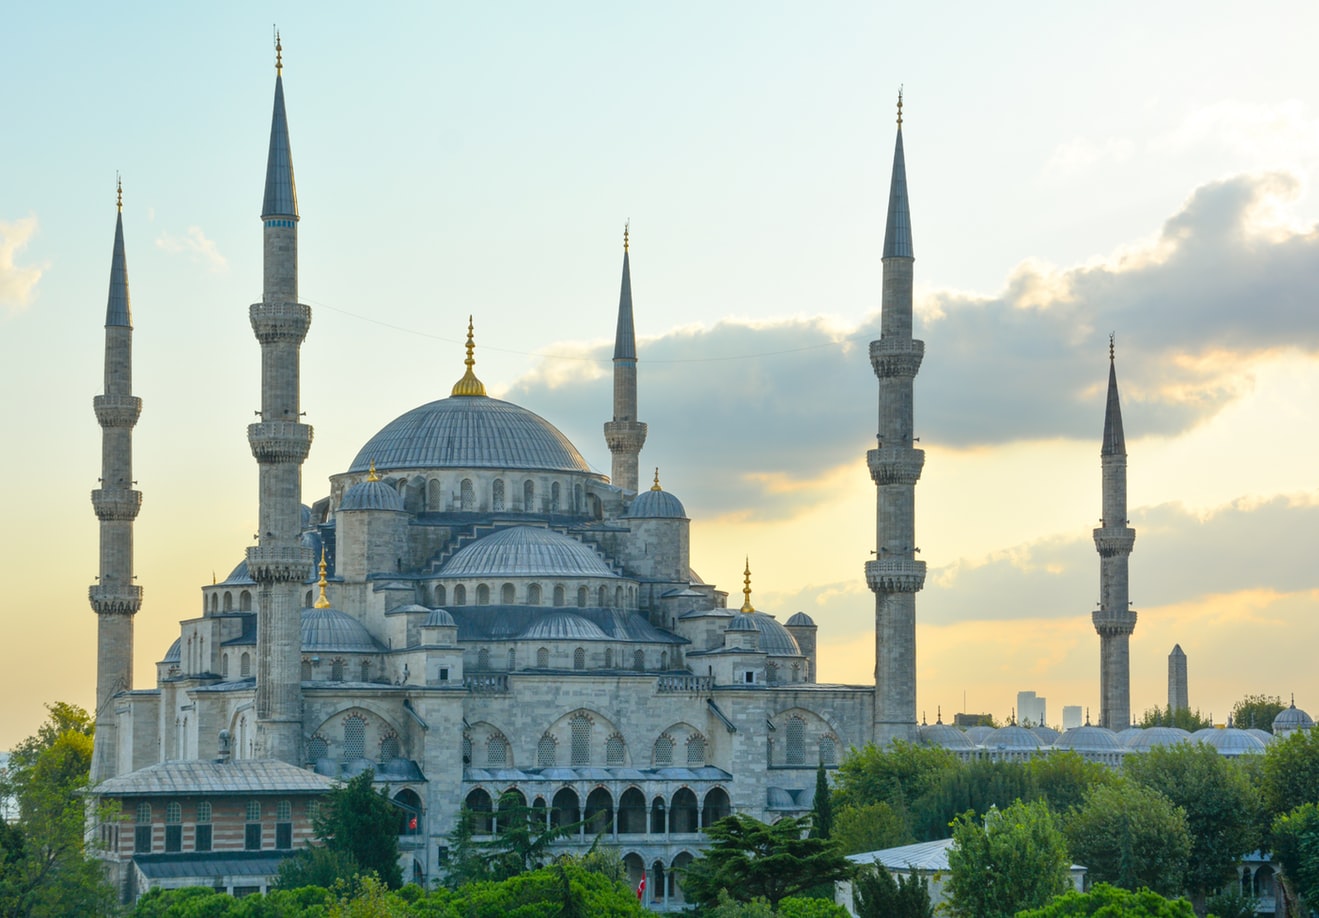 Süleymaniye Mosque built on top of the third hill of historical Istanbul is one of the biggest mosques of the city | How to spend the perfect day in Istanbul | Mondomulia